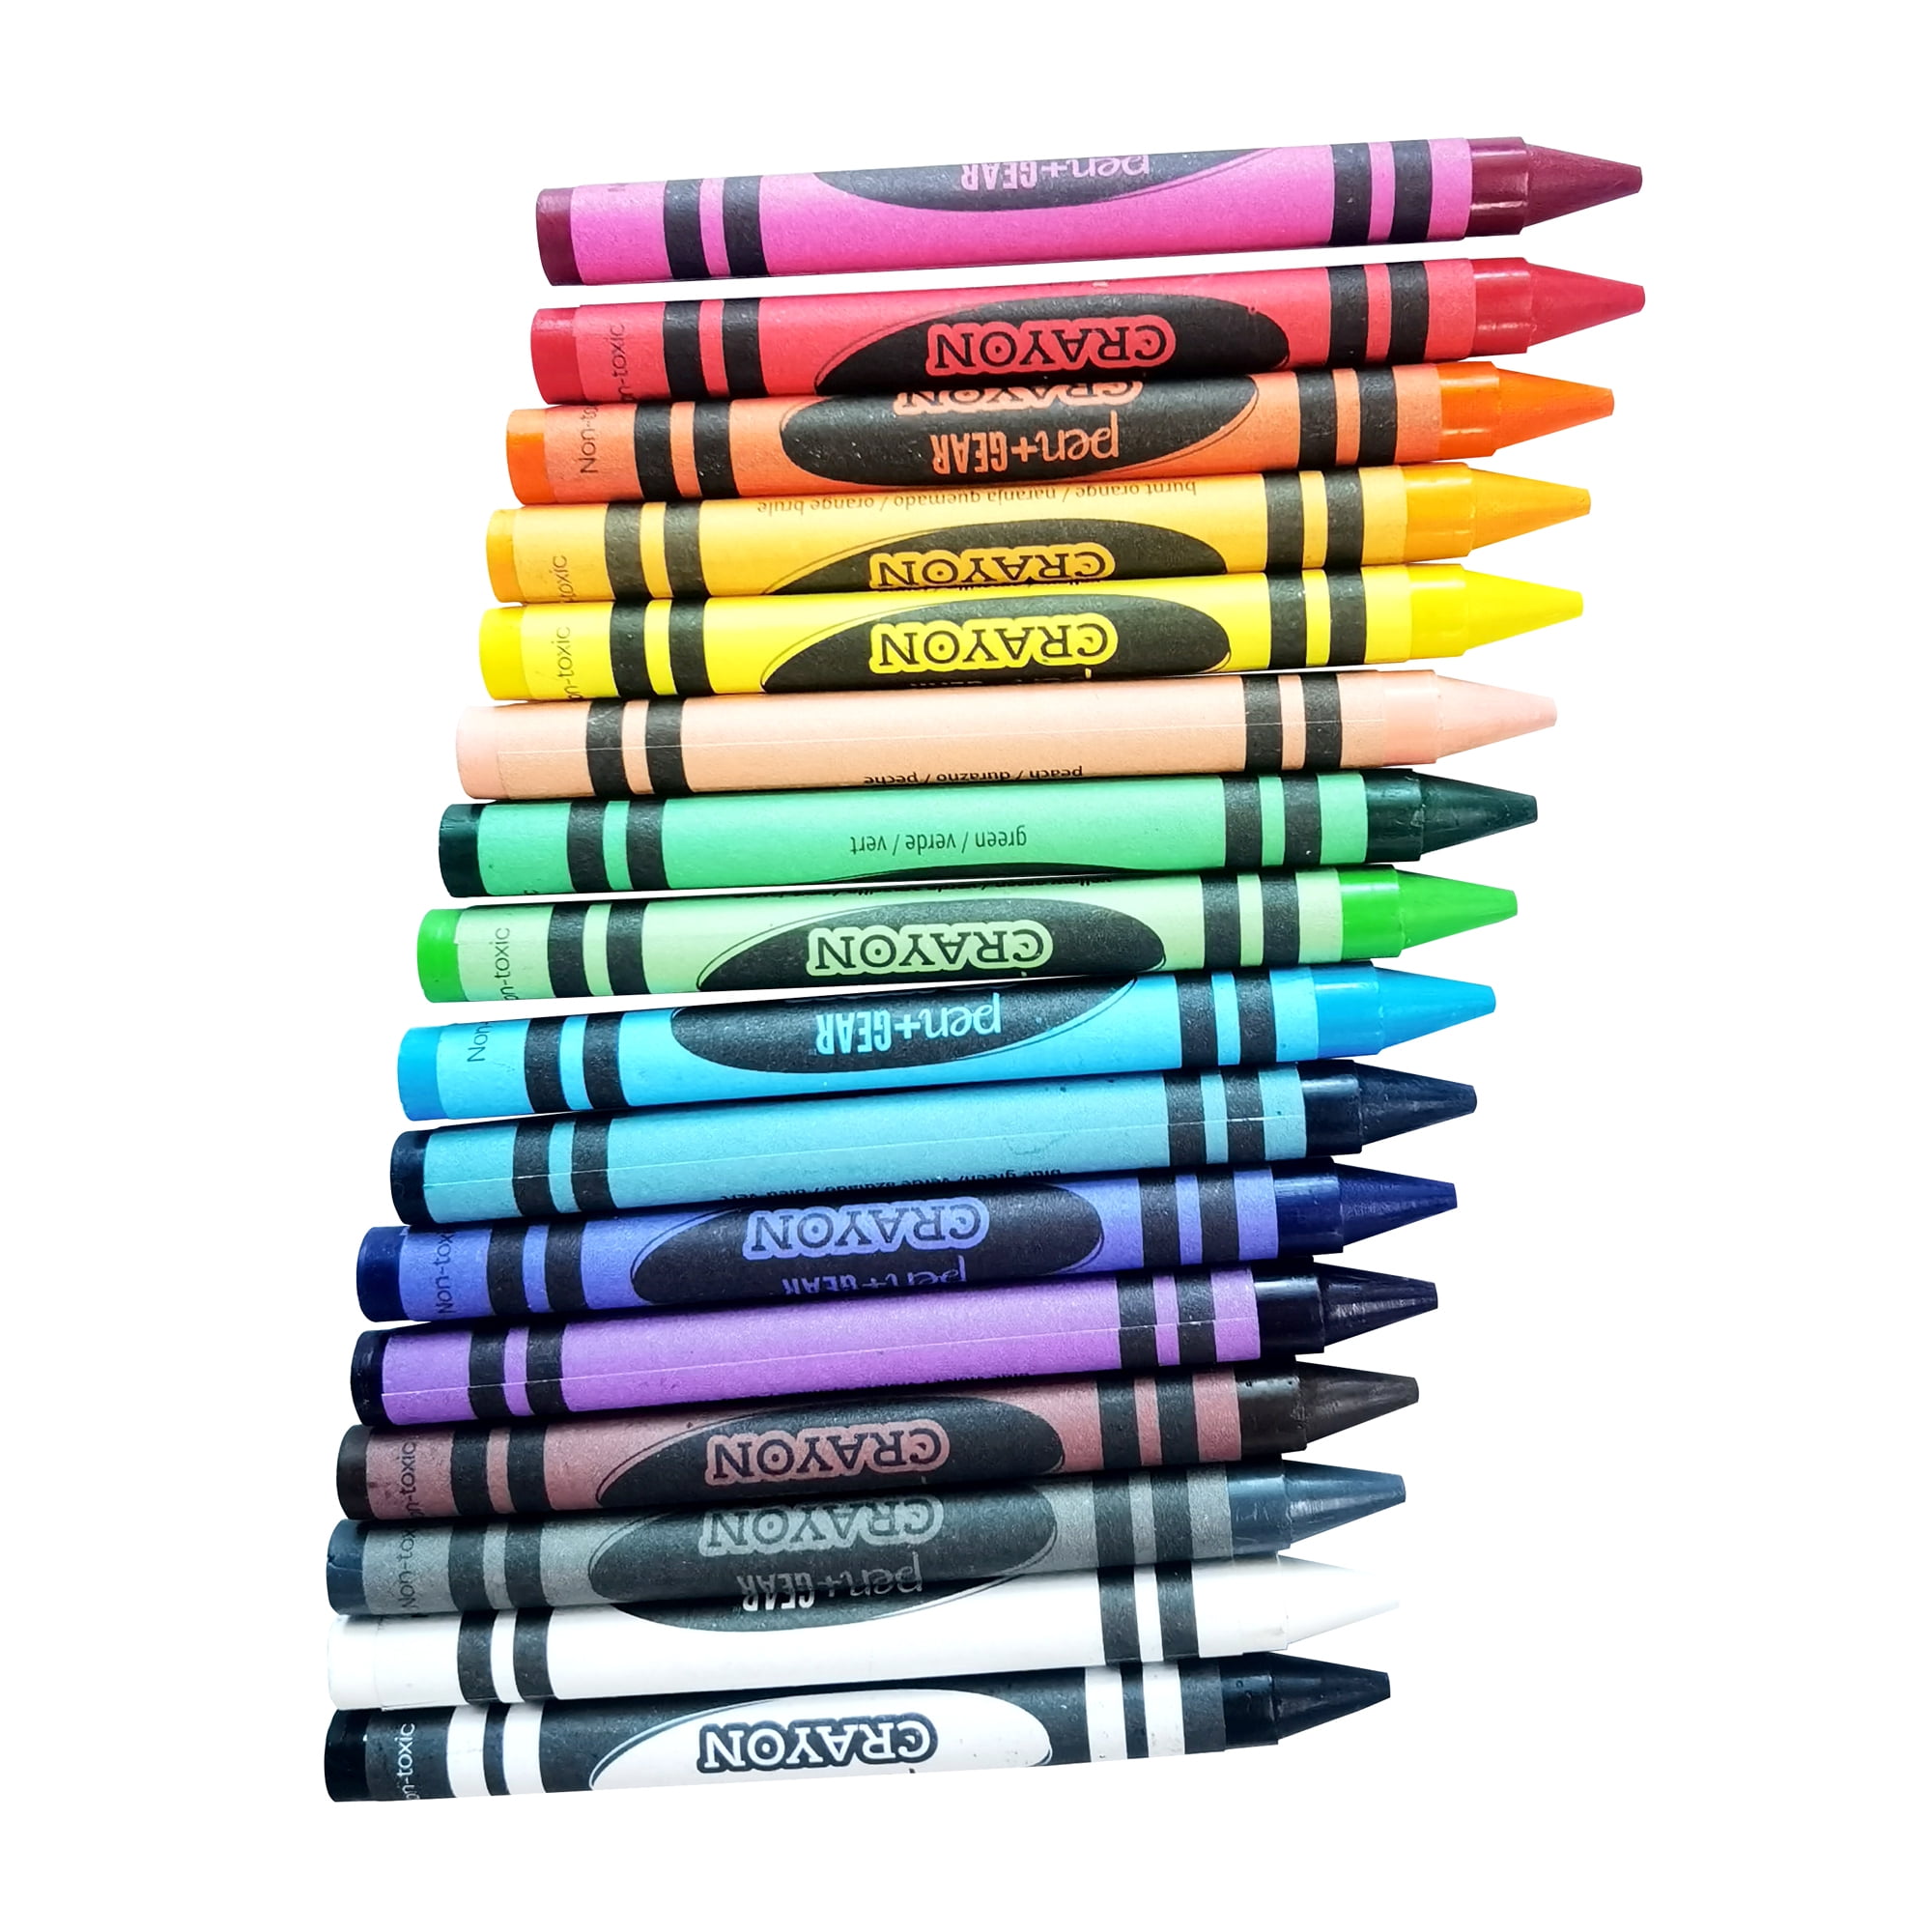 Pen + Gear Classic Crayons, 400 Count in Class Pack, 16 Assorted Colors